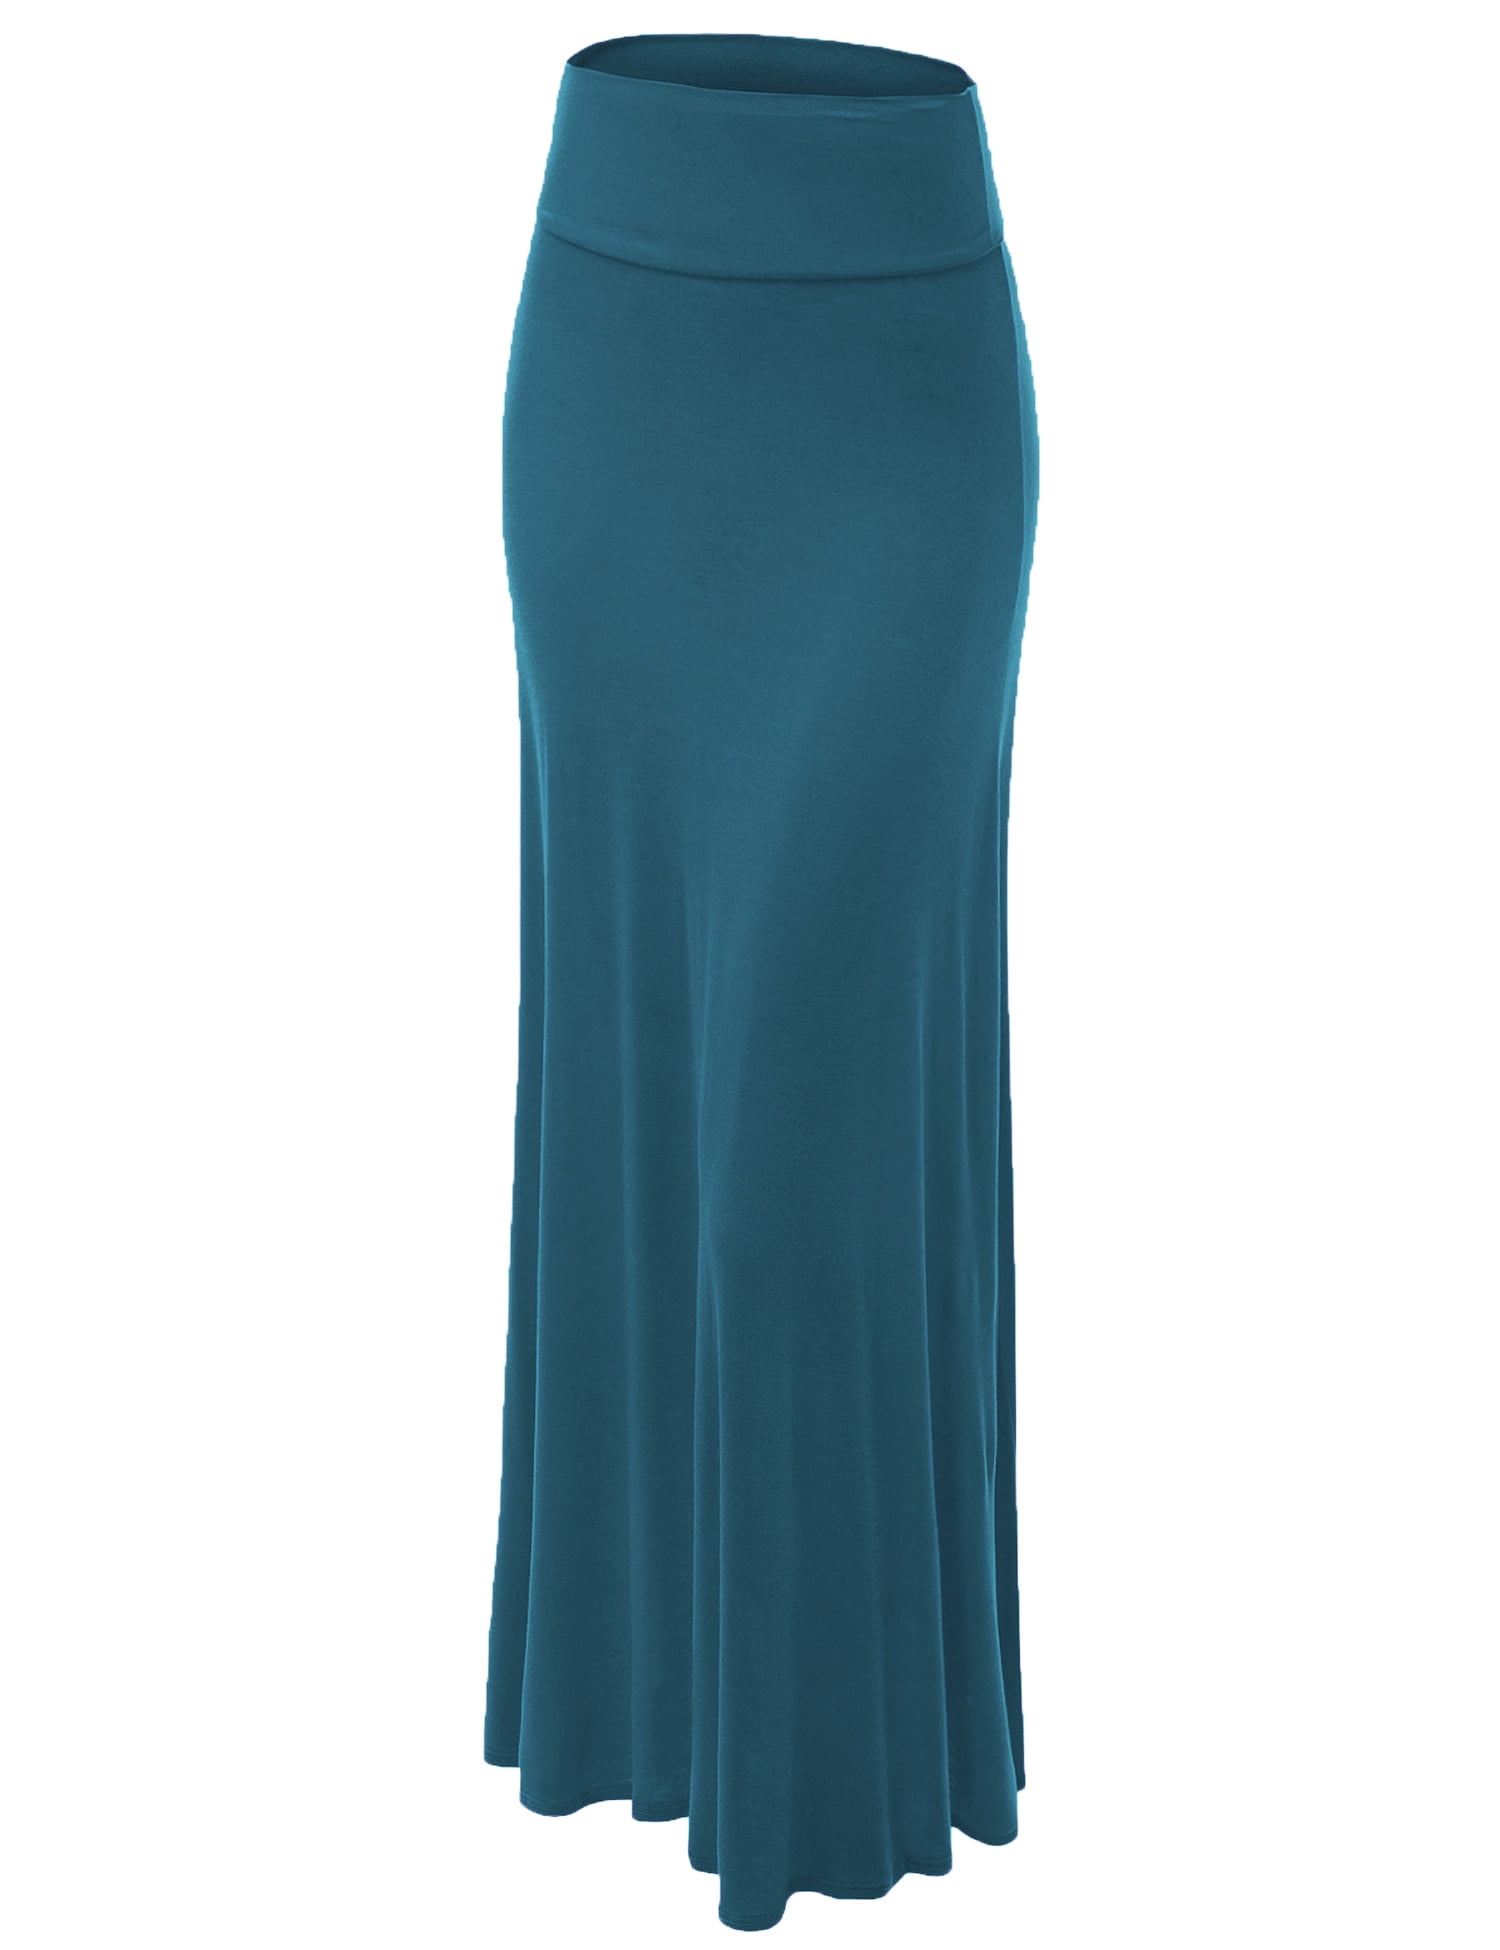 Made by Johnny Women's Fold-Over Maxi Skirt M TEAL - Walmart.com